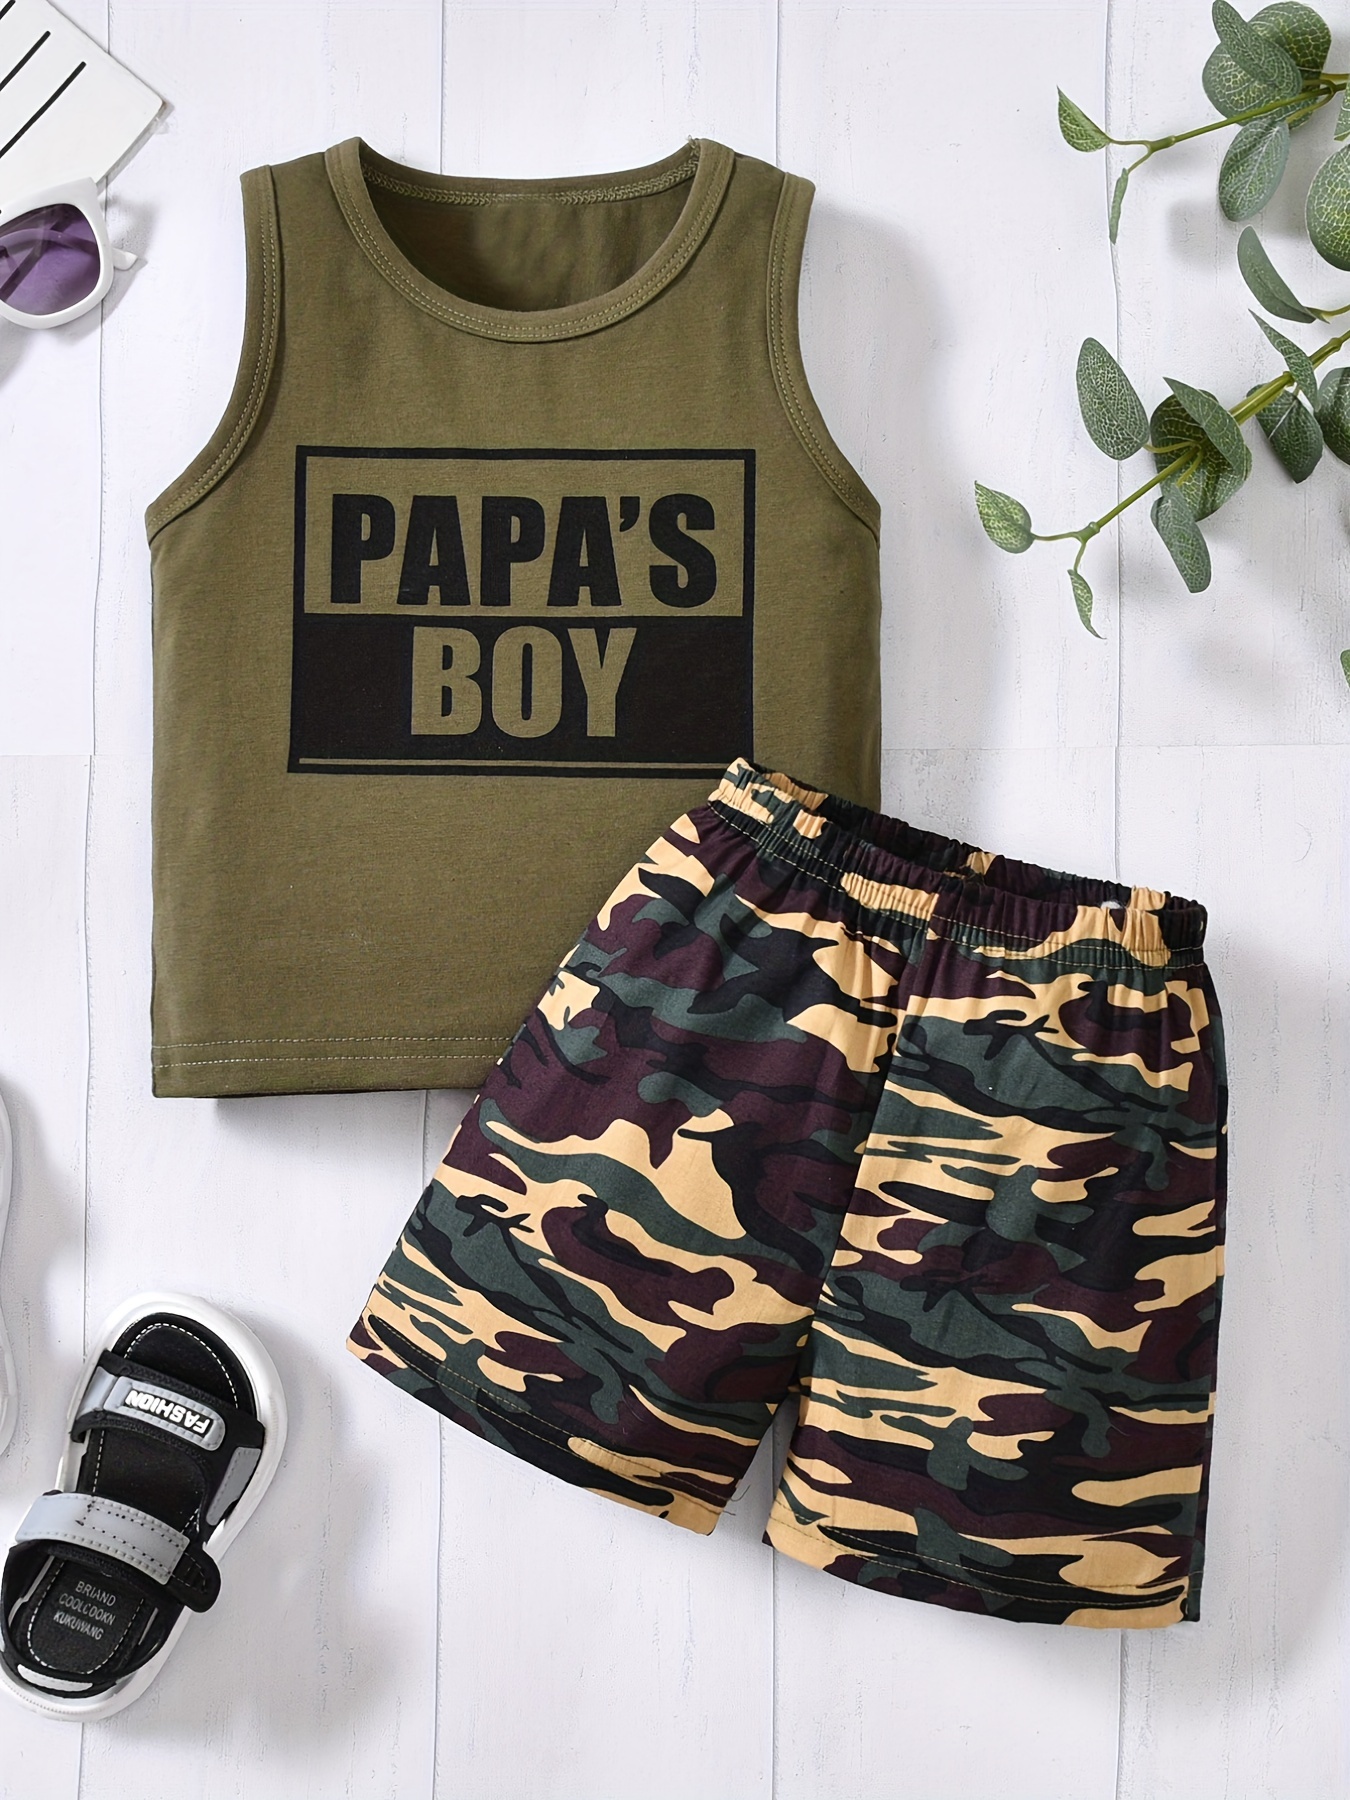 2pcs Baby Boy Army Green Camouflage Sleeveless Hooded Top and Shorts Set